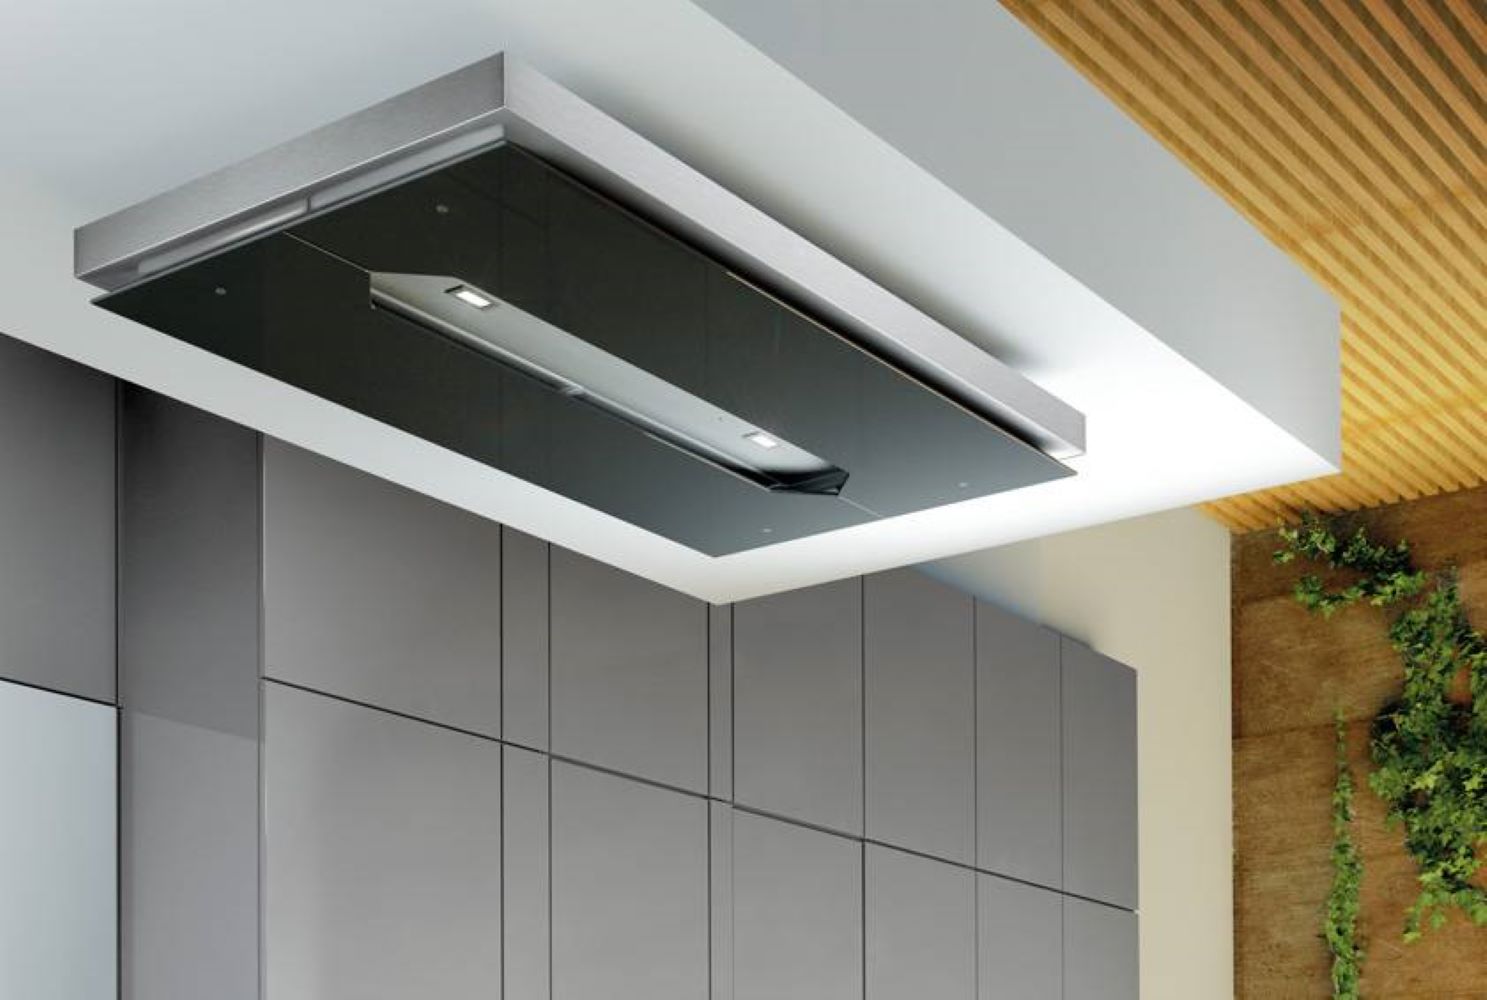 Airforce F139 A 120cm Ceiling Cooker Hood with Remote Control - Black Glass and Stainless Steel